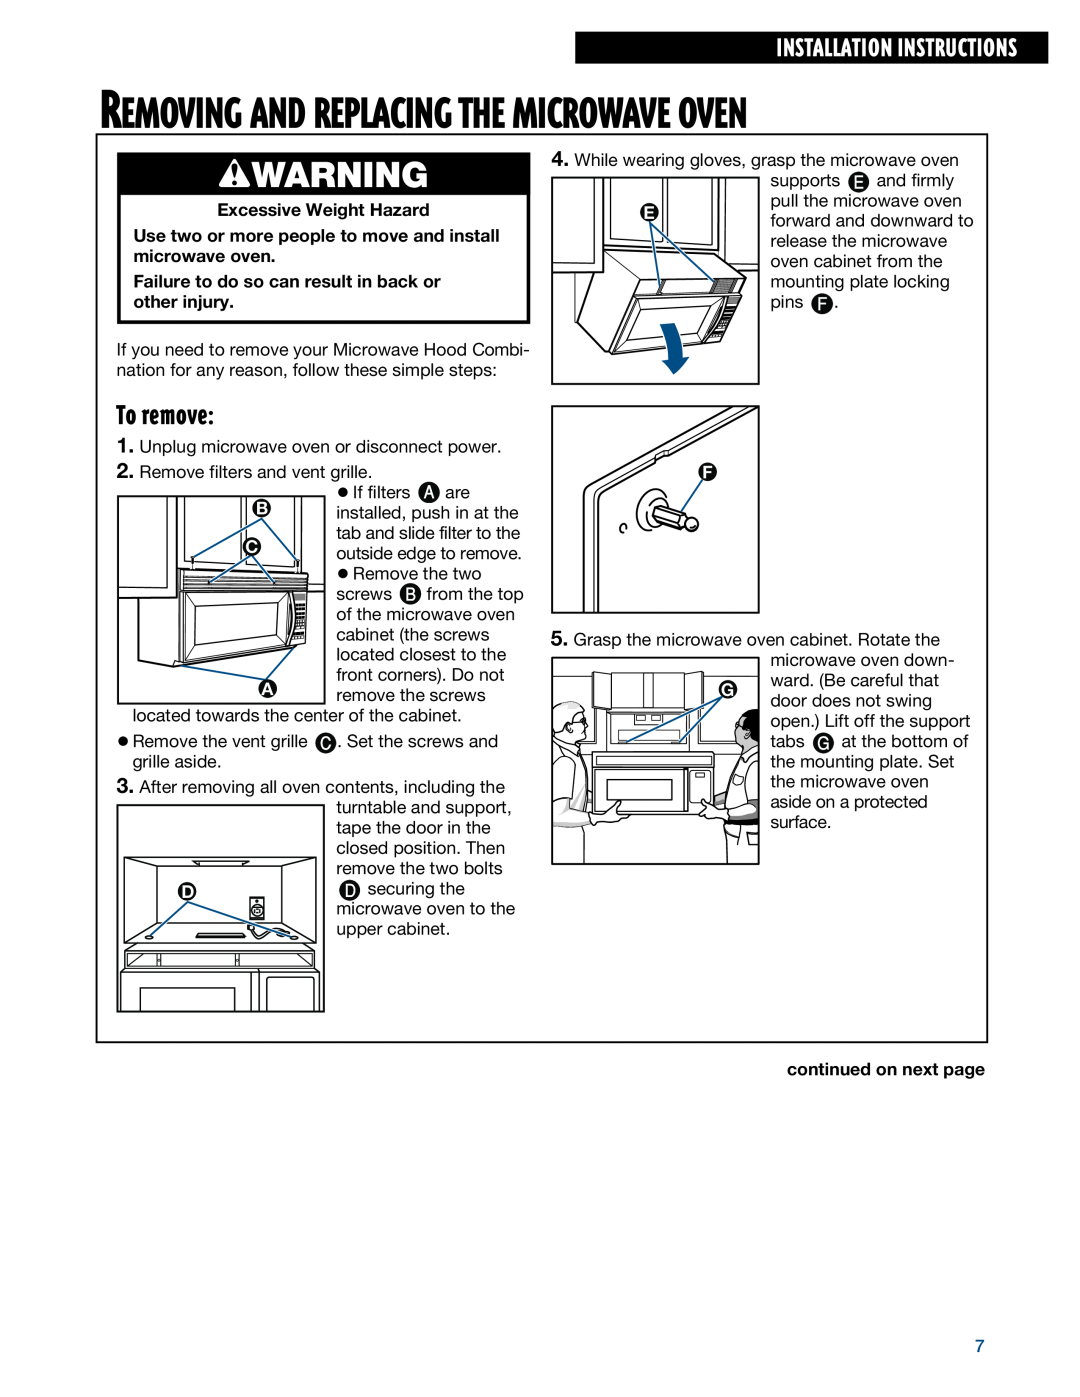 Whirlpool MHE14RF To remove, Installation Instructions, Removing And Replacing The Microwave Oven, wWARNING 